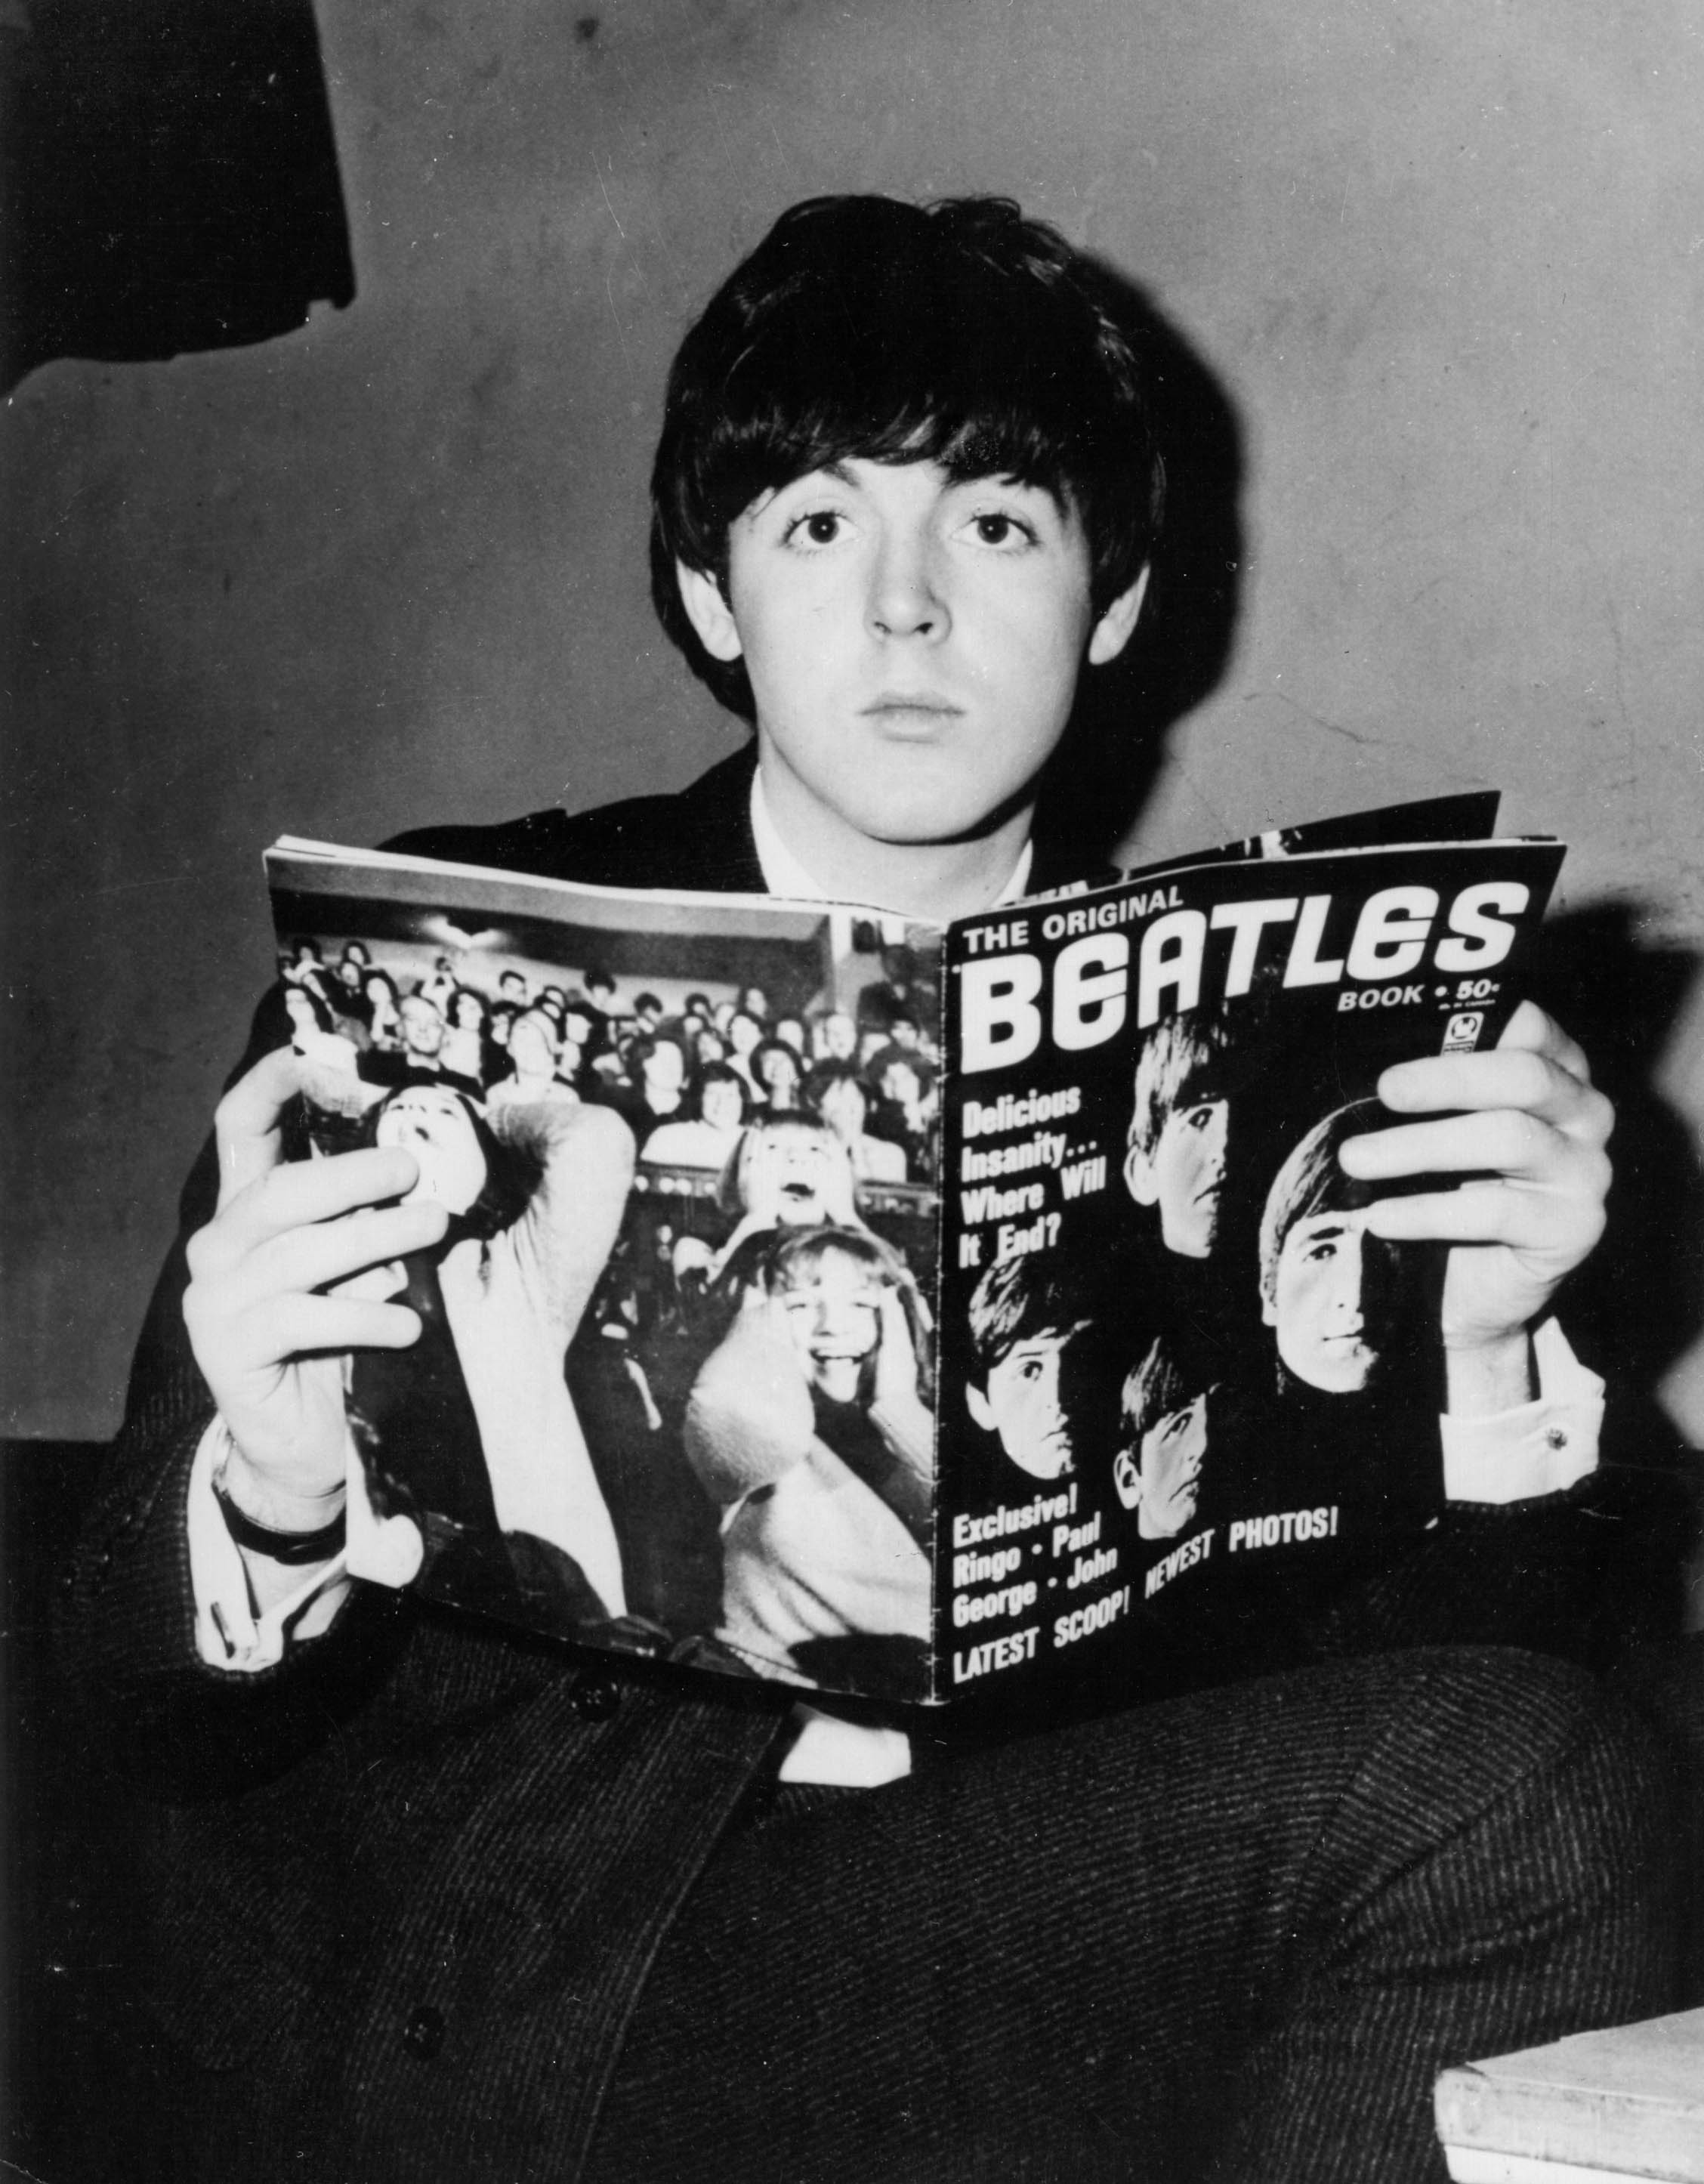 Paul McCartney poses for a portrait holding a Beatles fanzine which depicts 'Beatlemania' on the back cover, 1964.